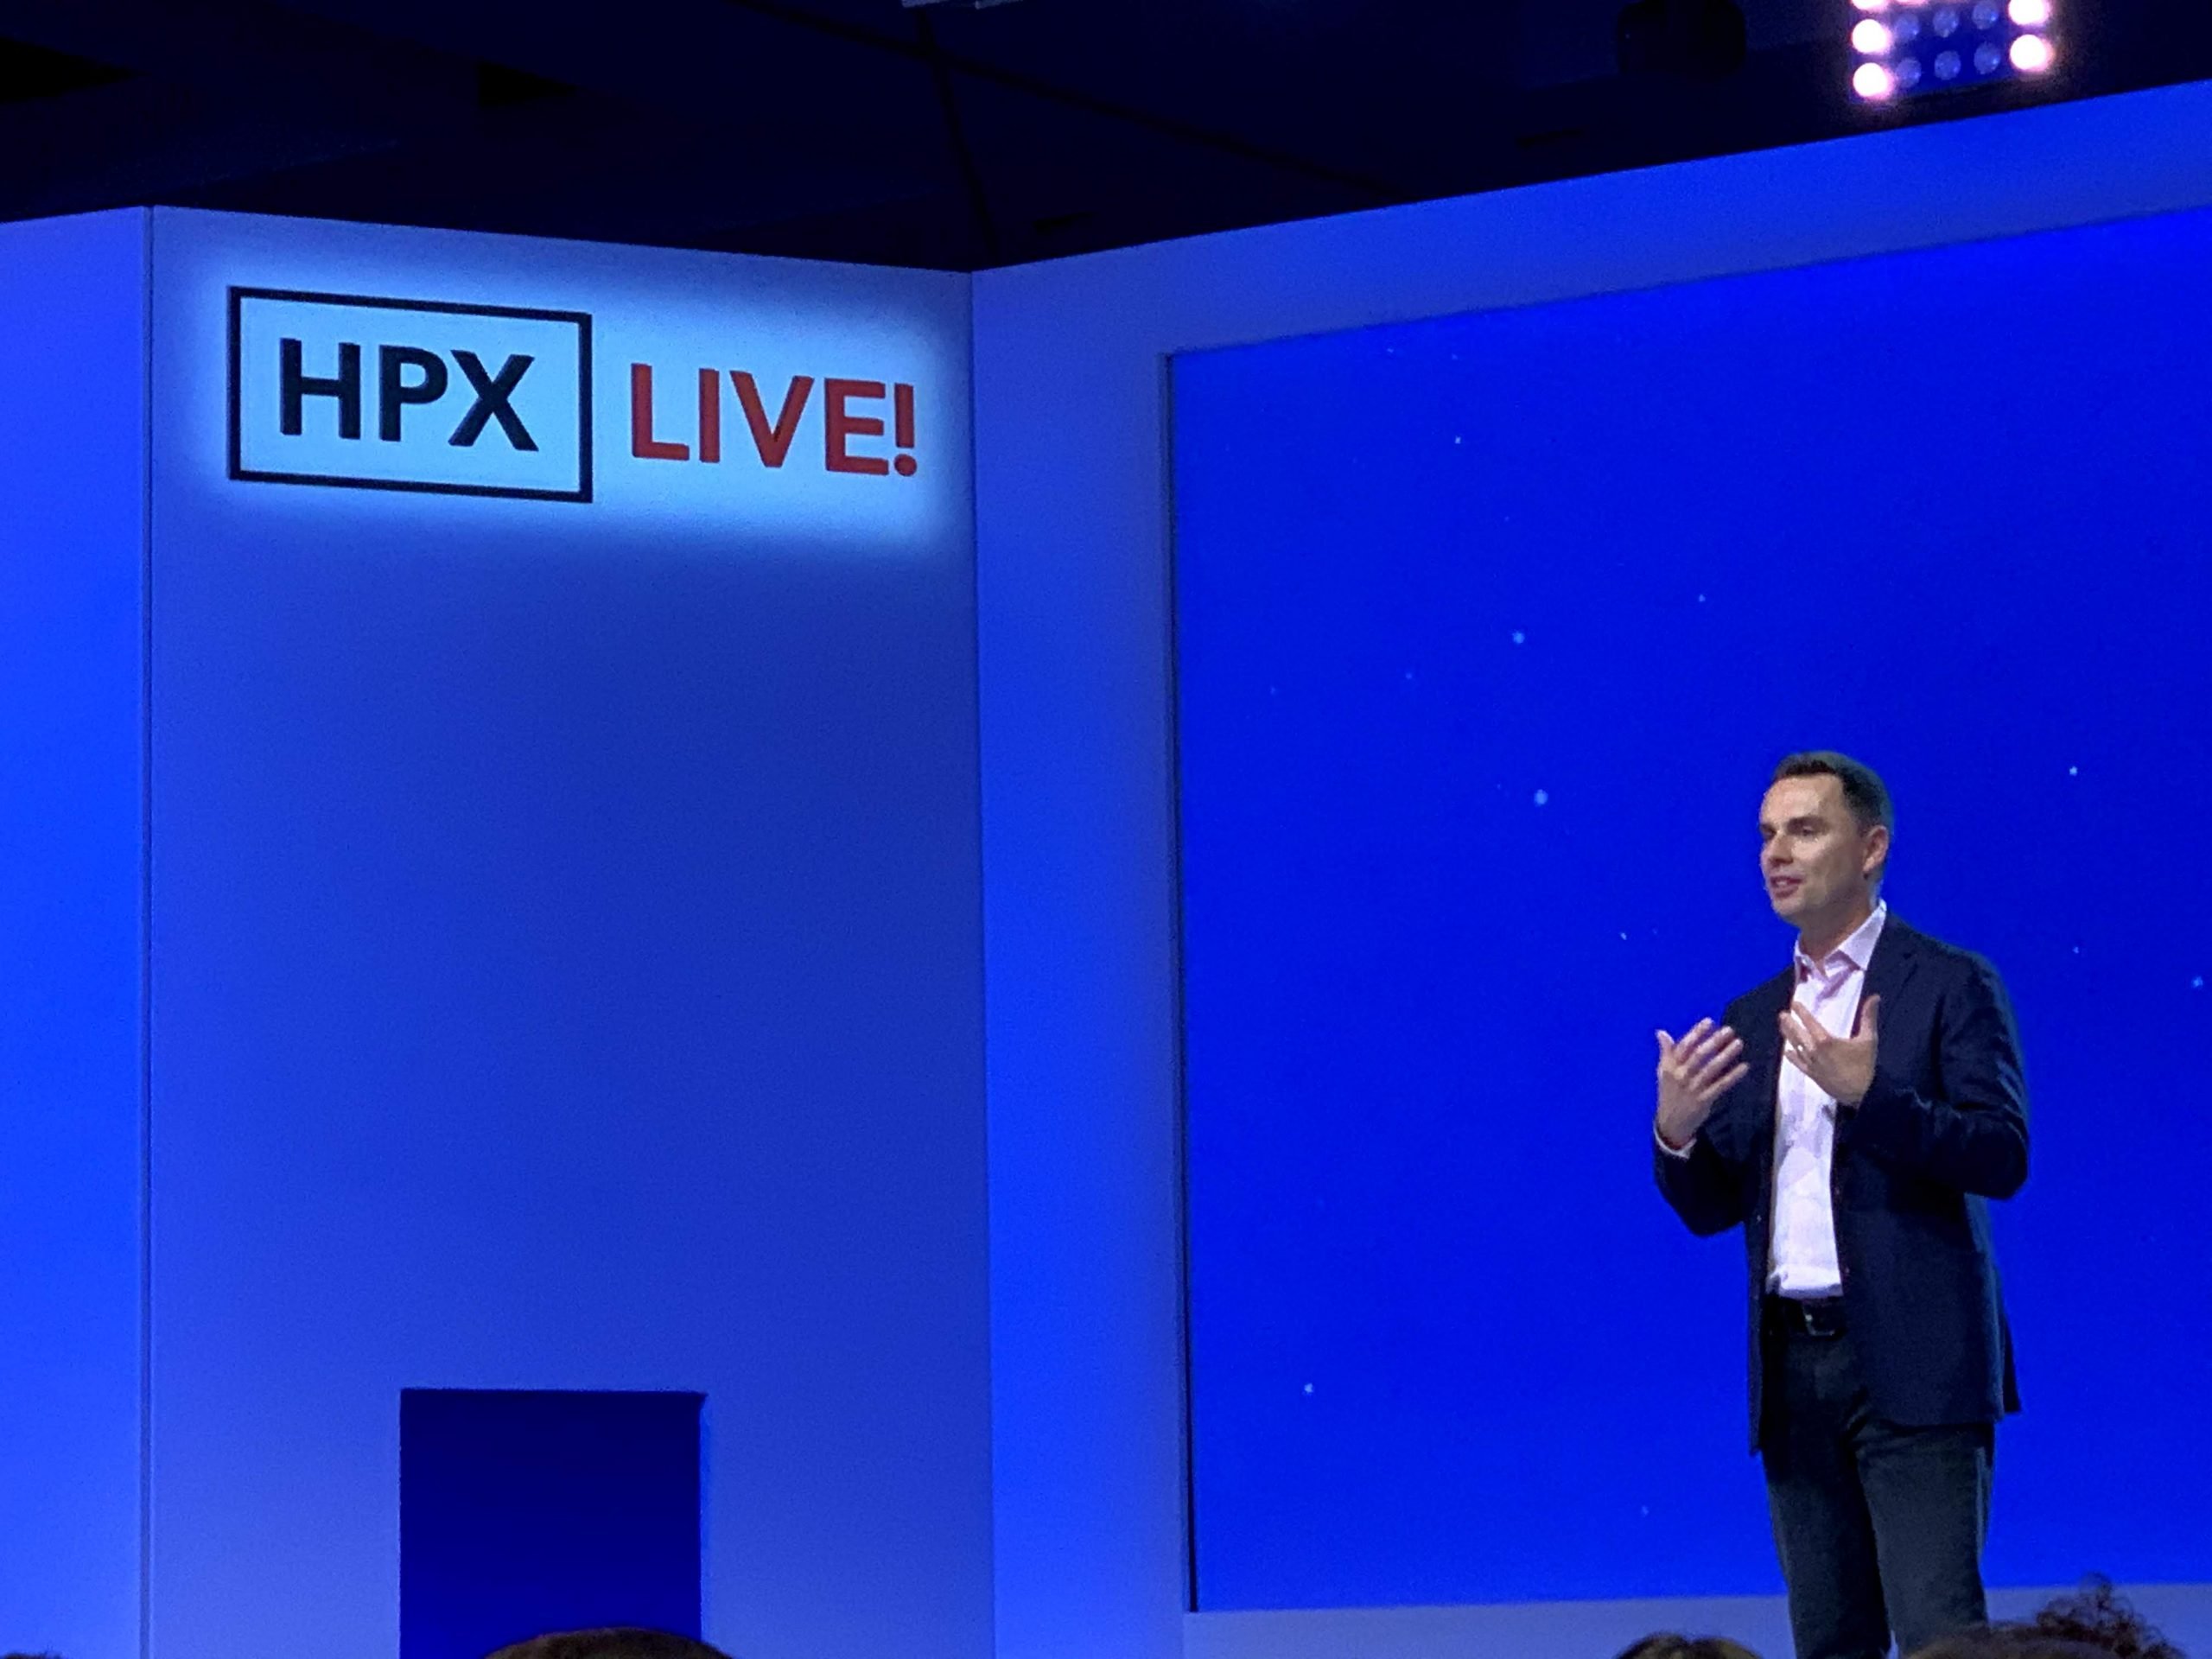 13 Takeaways from Brendon Burchard's High Performance Experience (HPX LIVE)